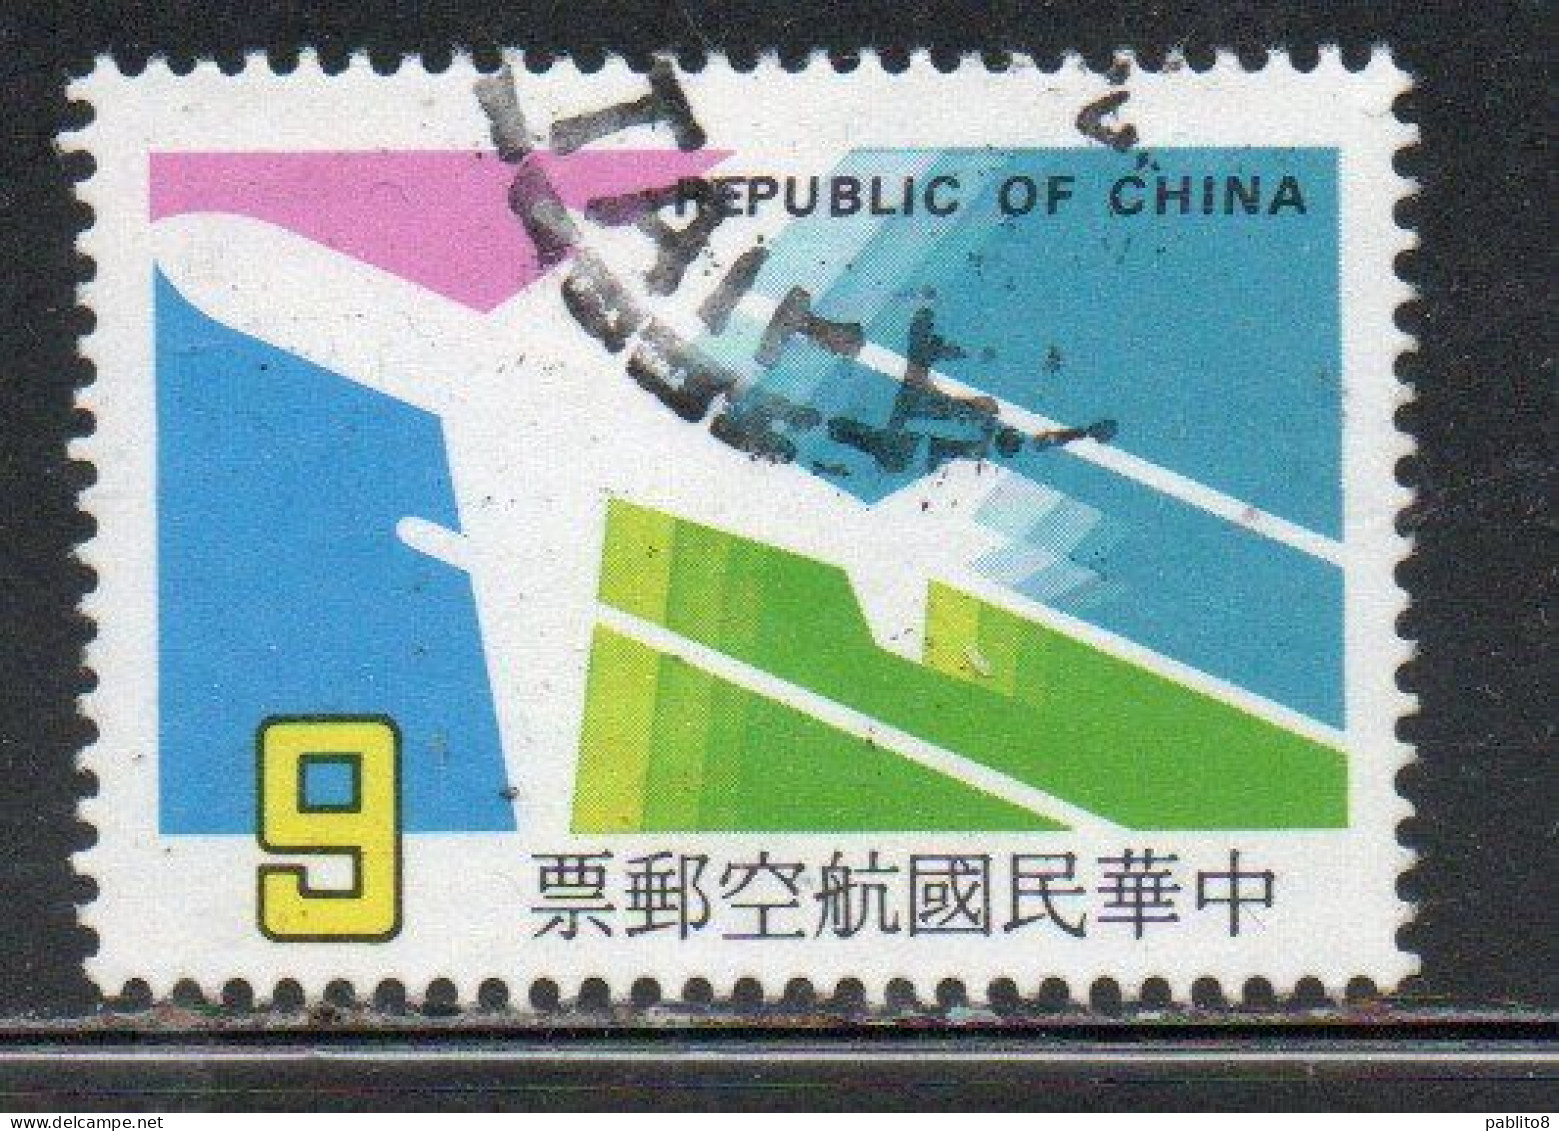 CHINA REPUBLIC CINA TAIWAN FORMOSA 1987 AIR POST MAIL AIRMAIL AIRPLANE 9$ USED USATO OBLITERE' - Luchtpost